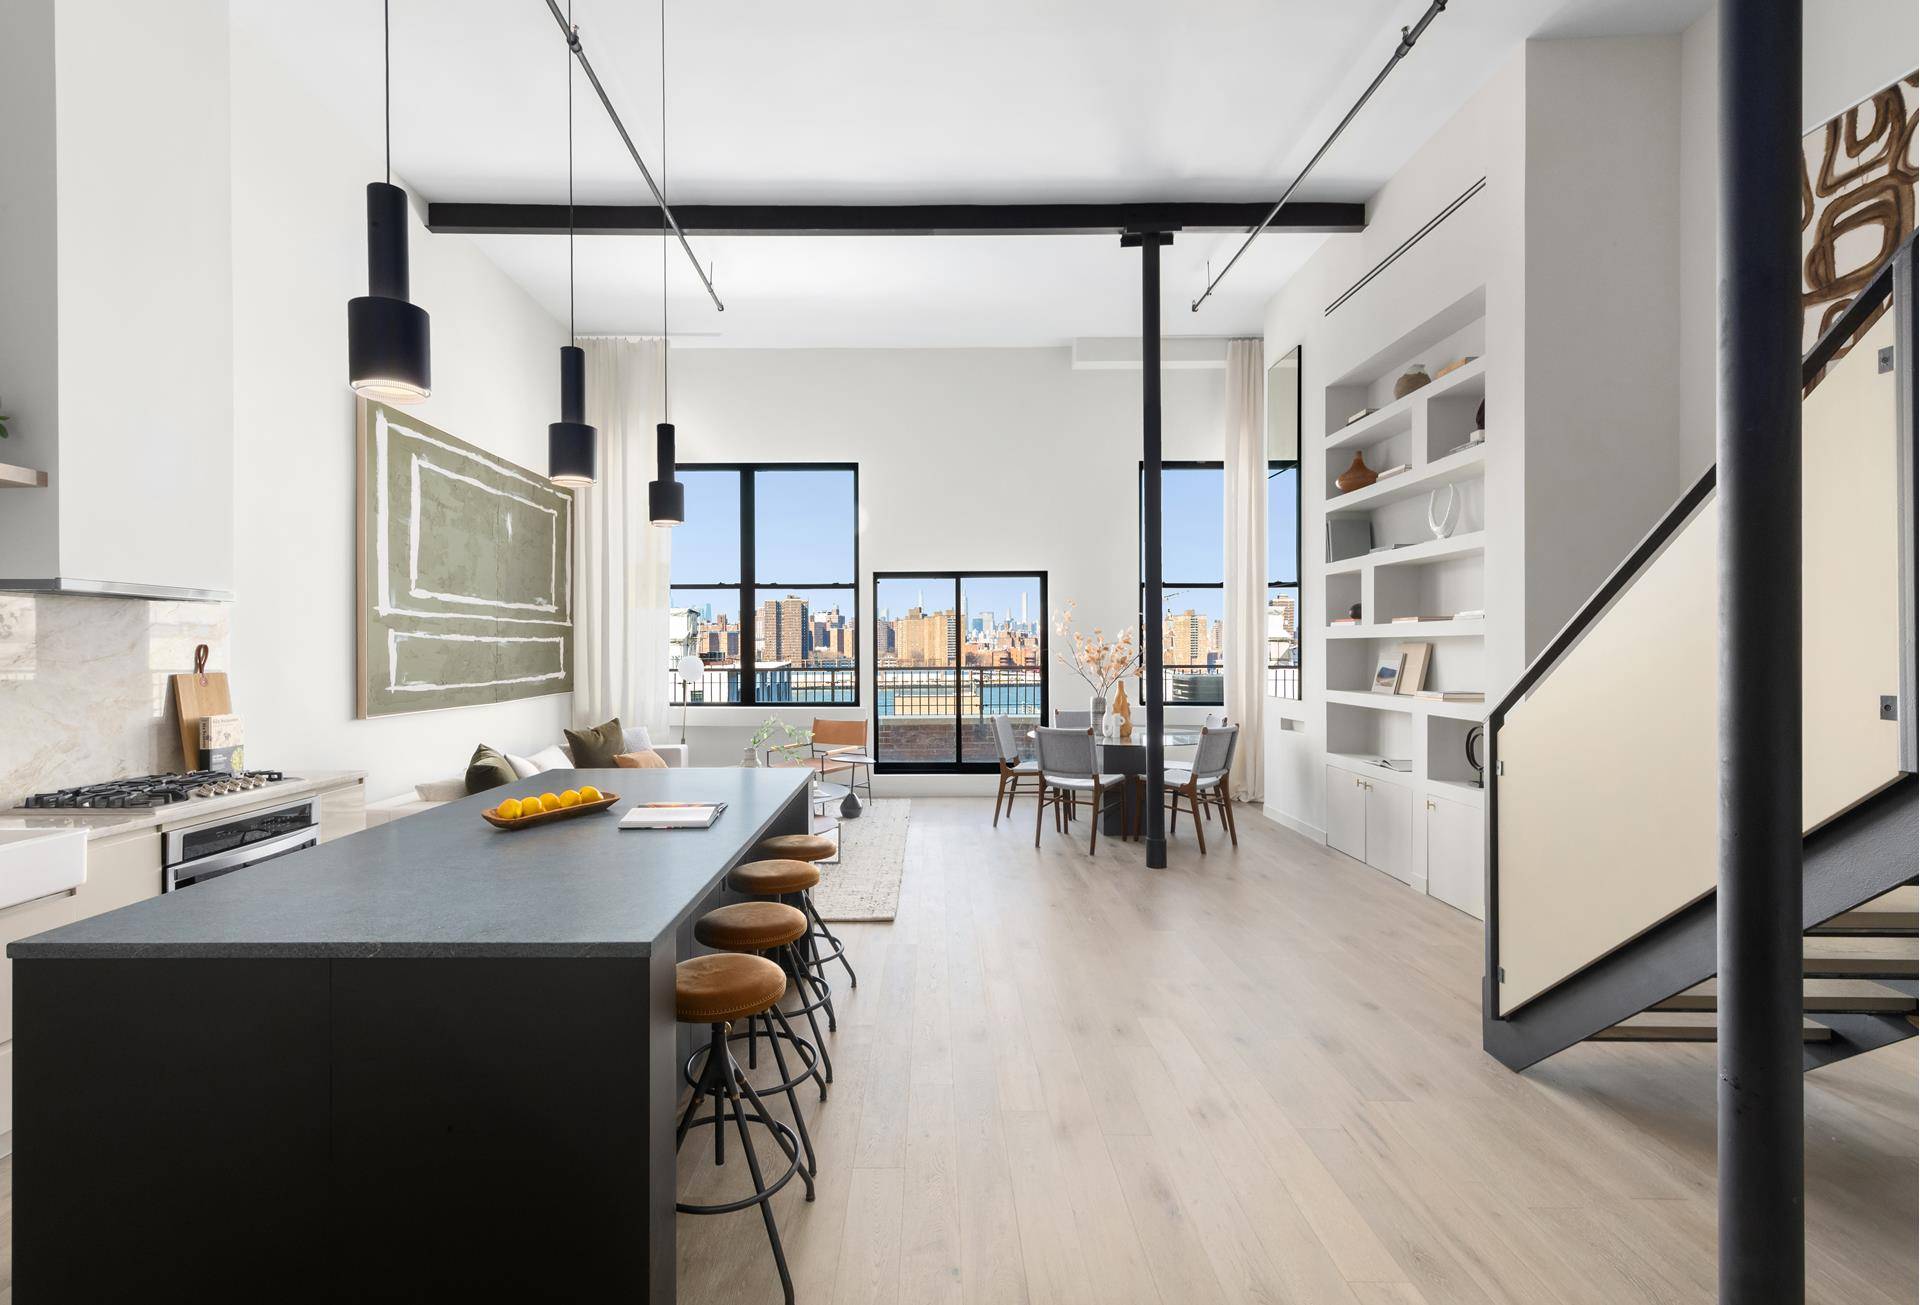 50 Bridge Street, 612 is a brand new, exquisitely gut renovated luxury 2 bed 2 bath condominium unit with 2 expansive terraces and jaw dropping views from DUMBO of the ...